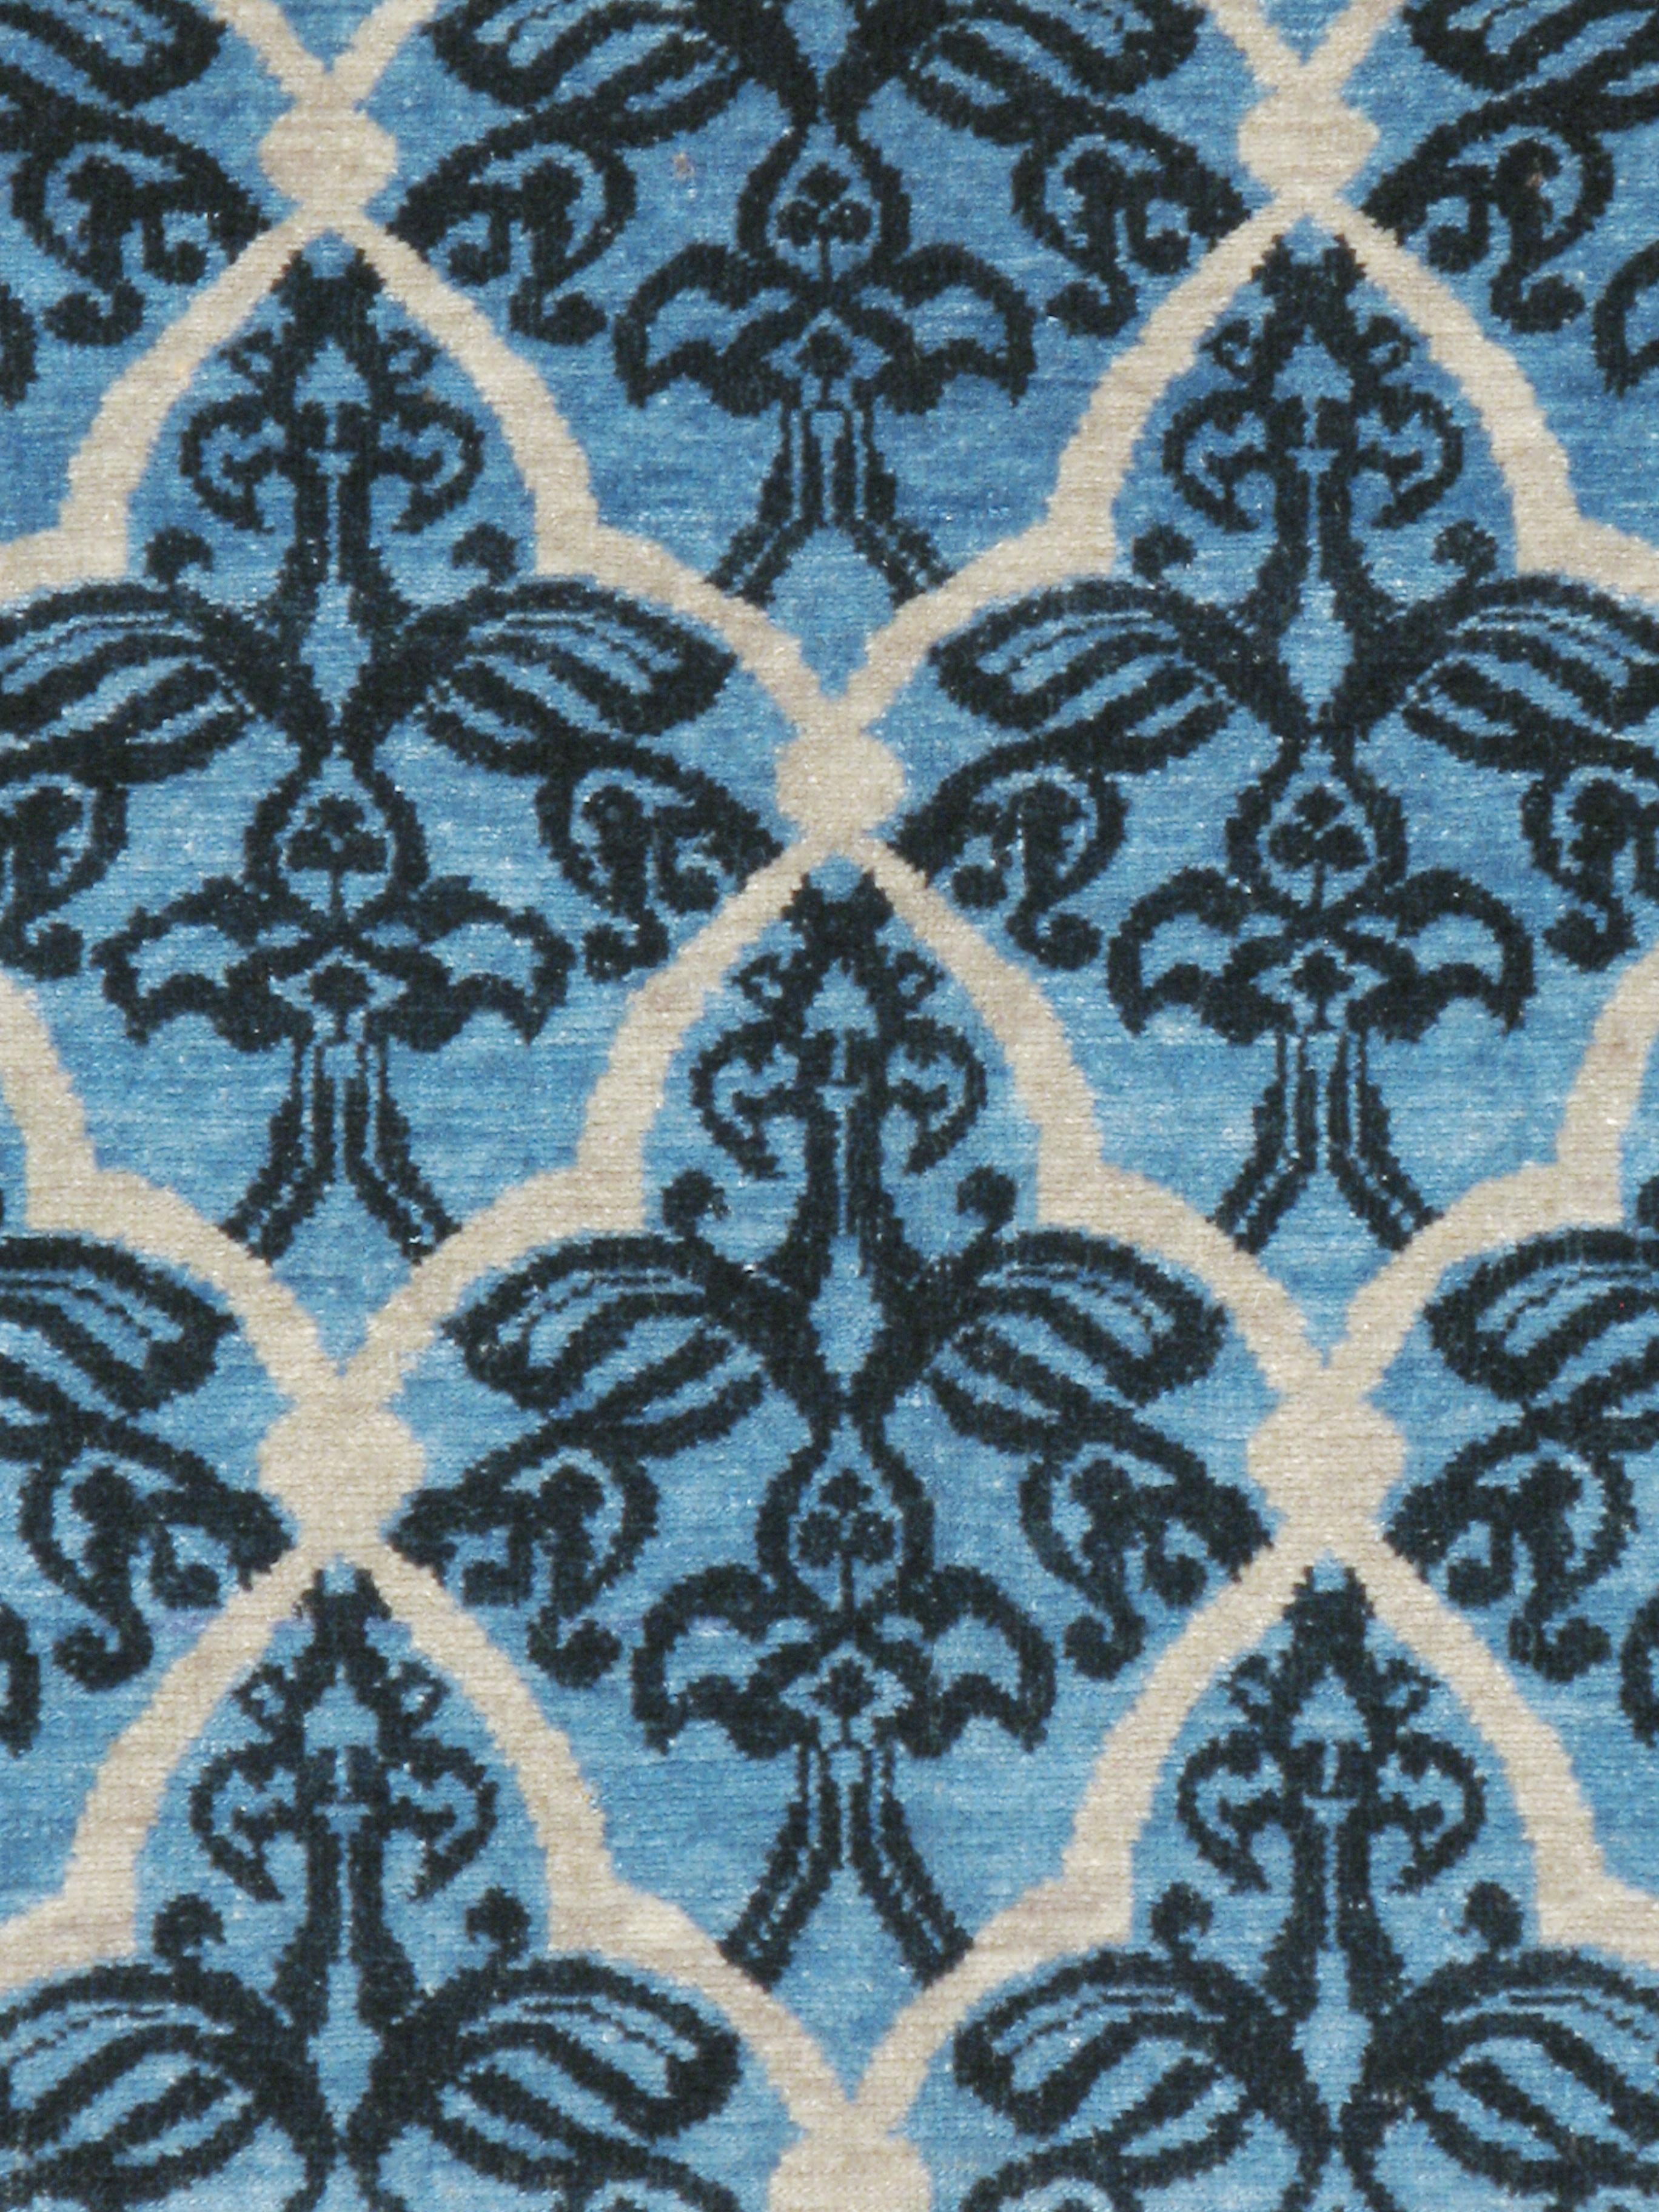 A vintage Persian modernist Malayer carpet from the mid-20th century. A shaped, diagonal all-over ecru lattice on a light blue, borderless field displays black outlined flowers incorporating fleur-de-lys motives. The lattice cells are halved at the